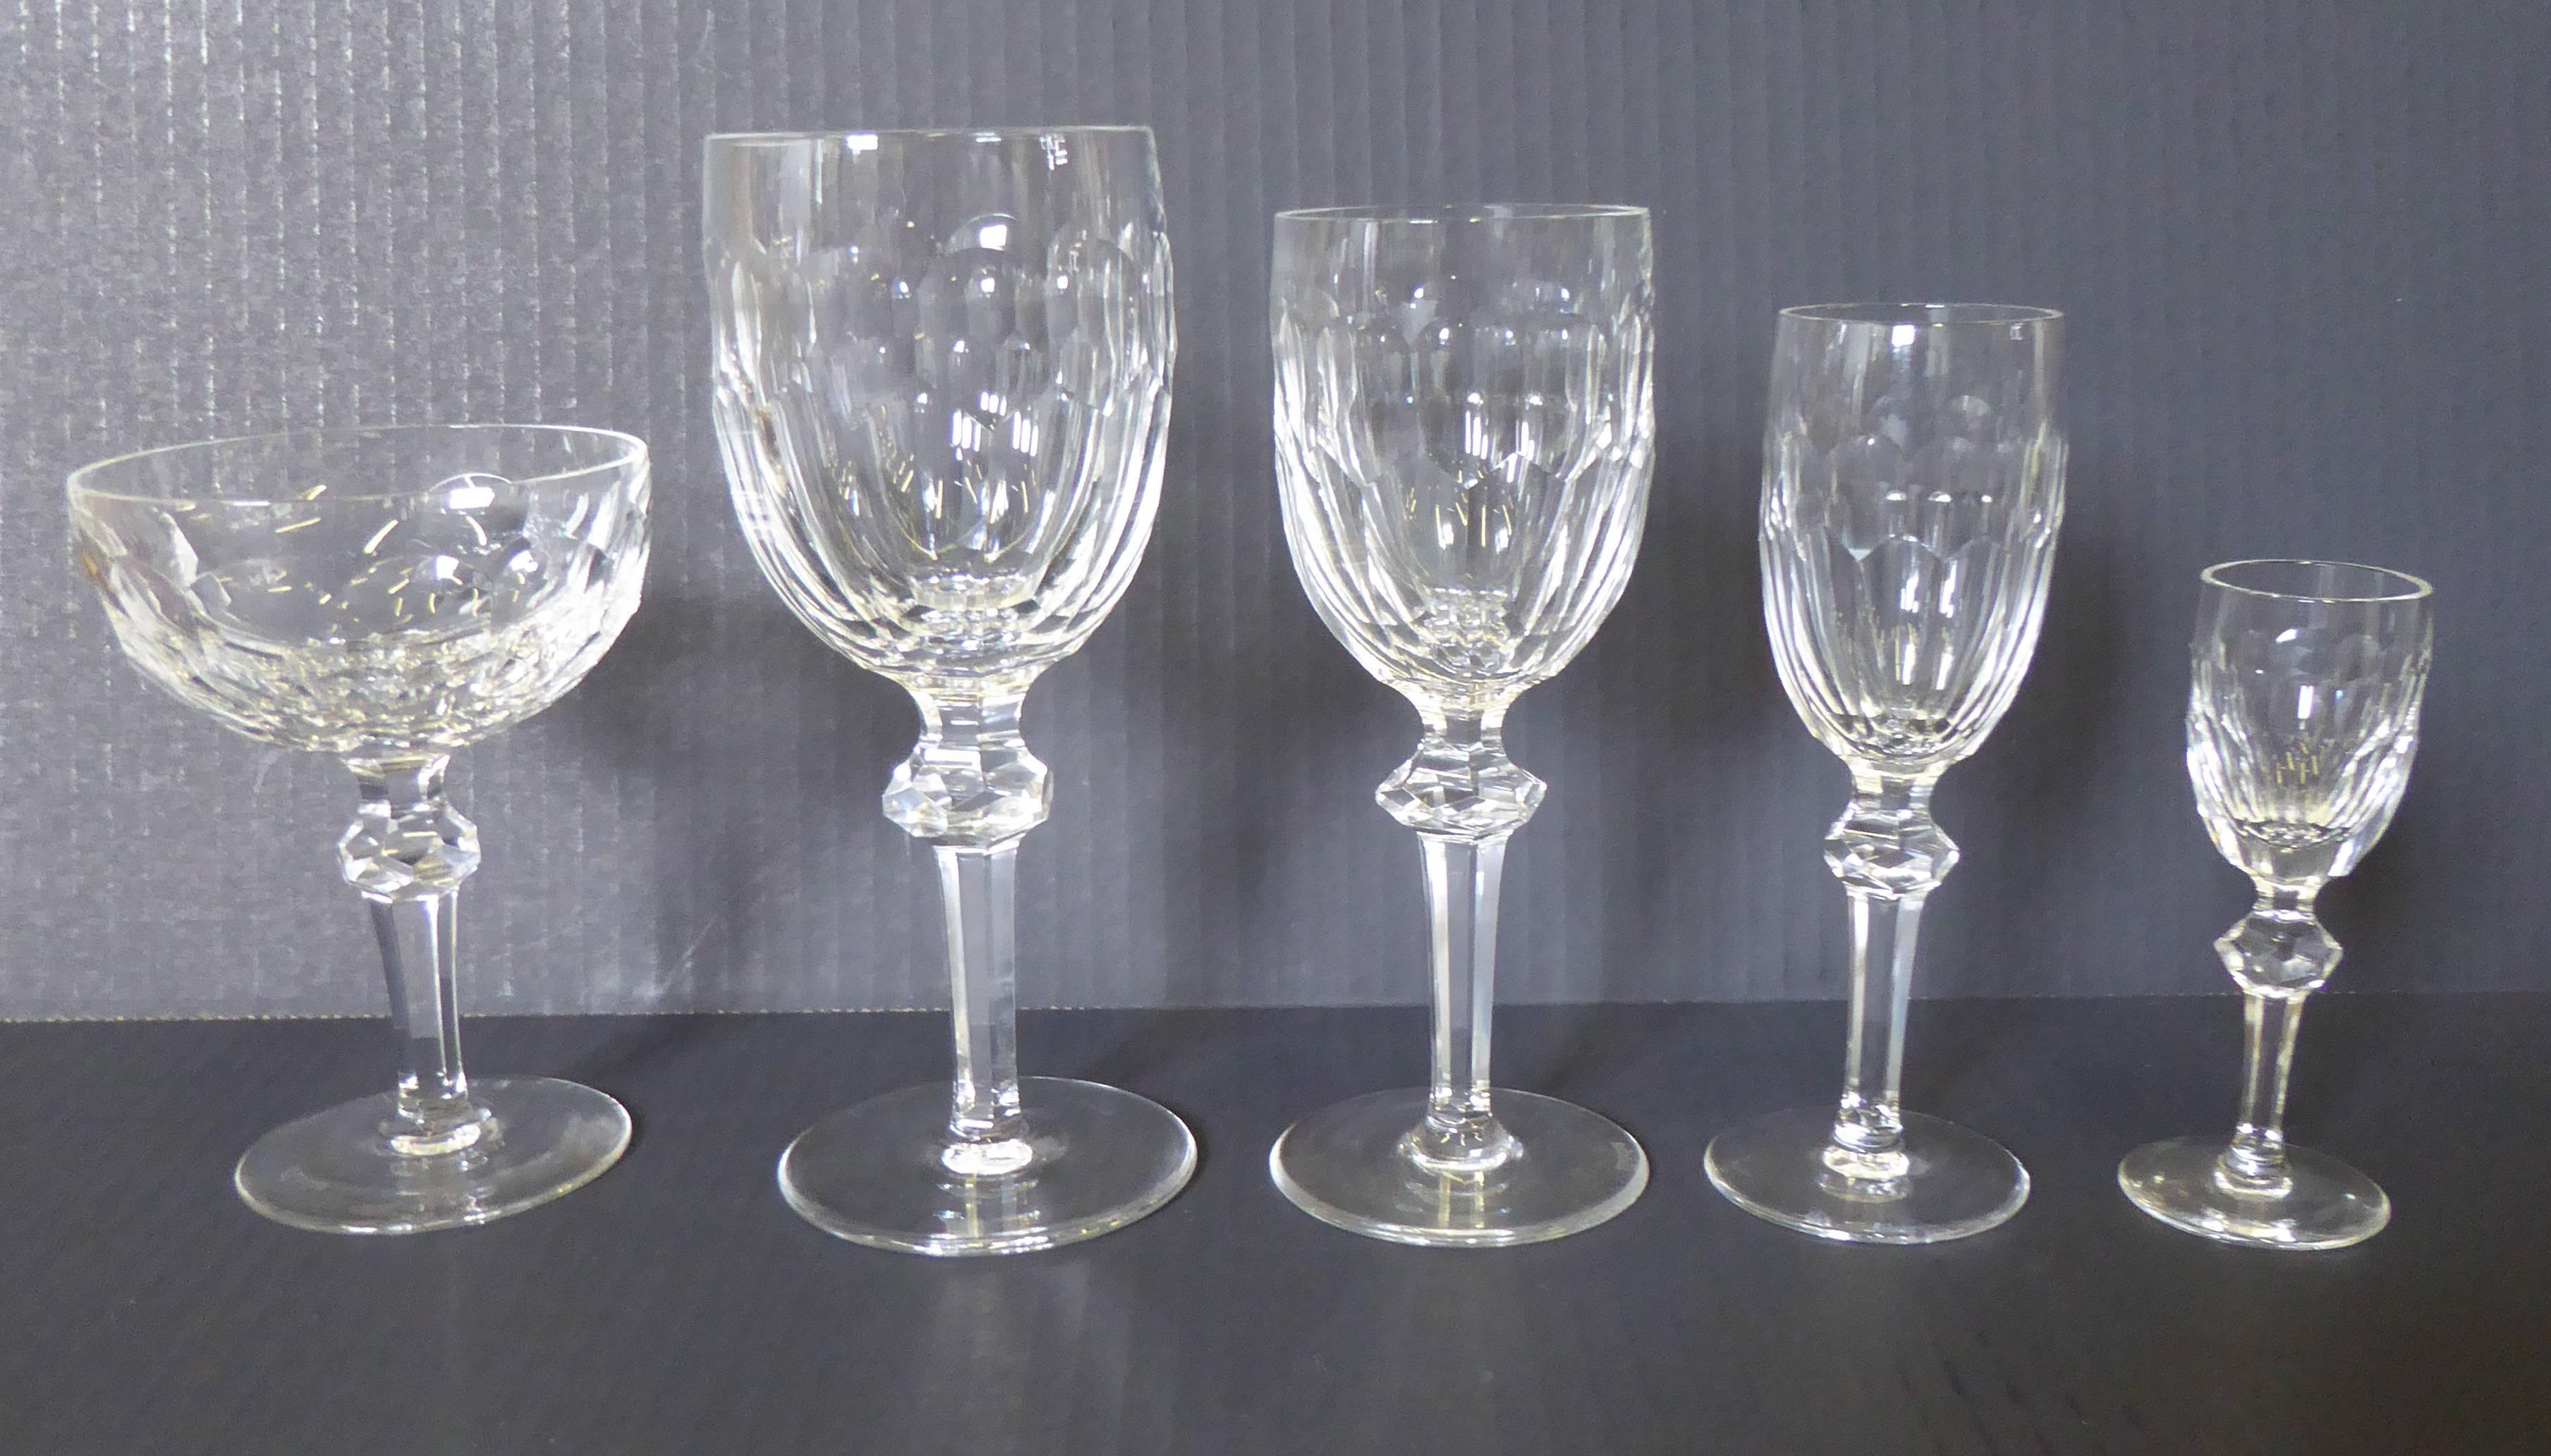 Curraghmore, introduced in 1968, is an elegant sparkle to the table from Waterford. Vintage and mint from 1973, this ensemble of 38 pieces of stemware includes eight each goblets for Champagne, claret (red wine), water and cordials and six sherry